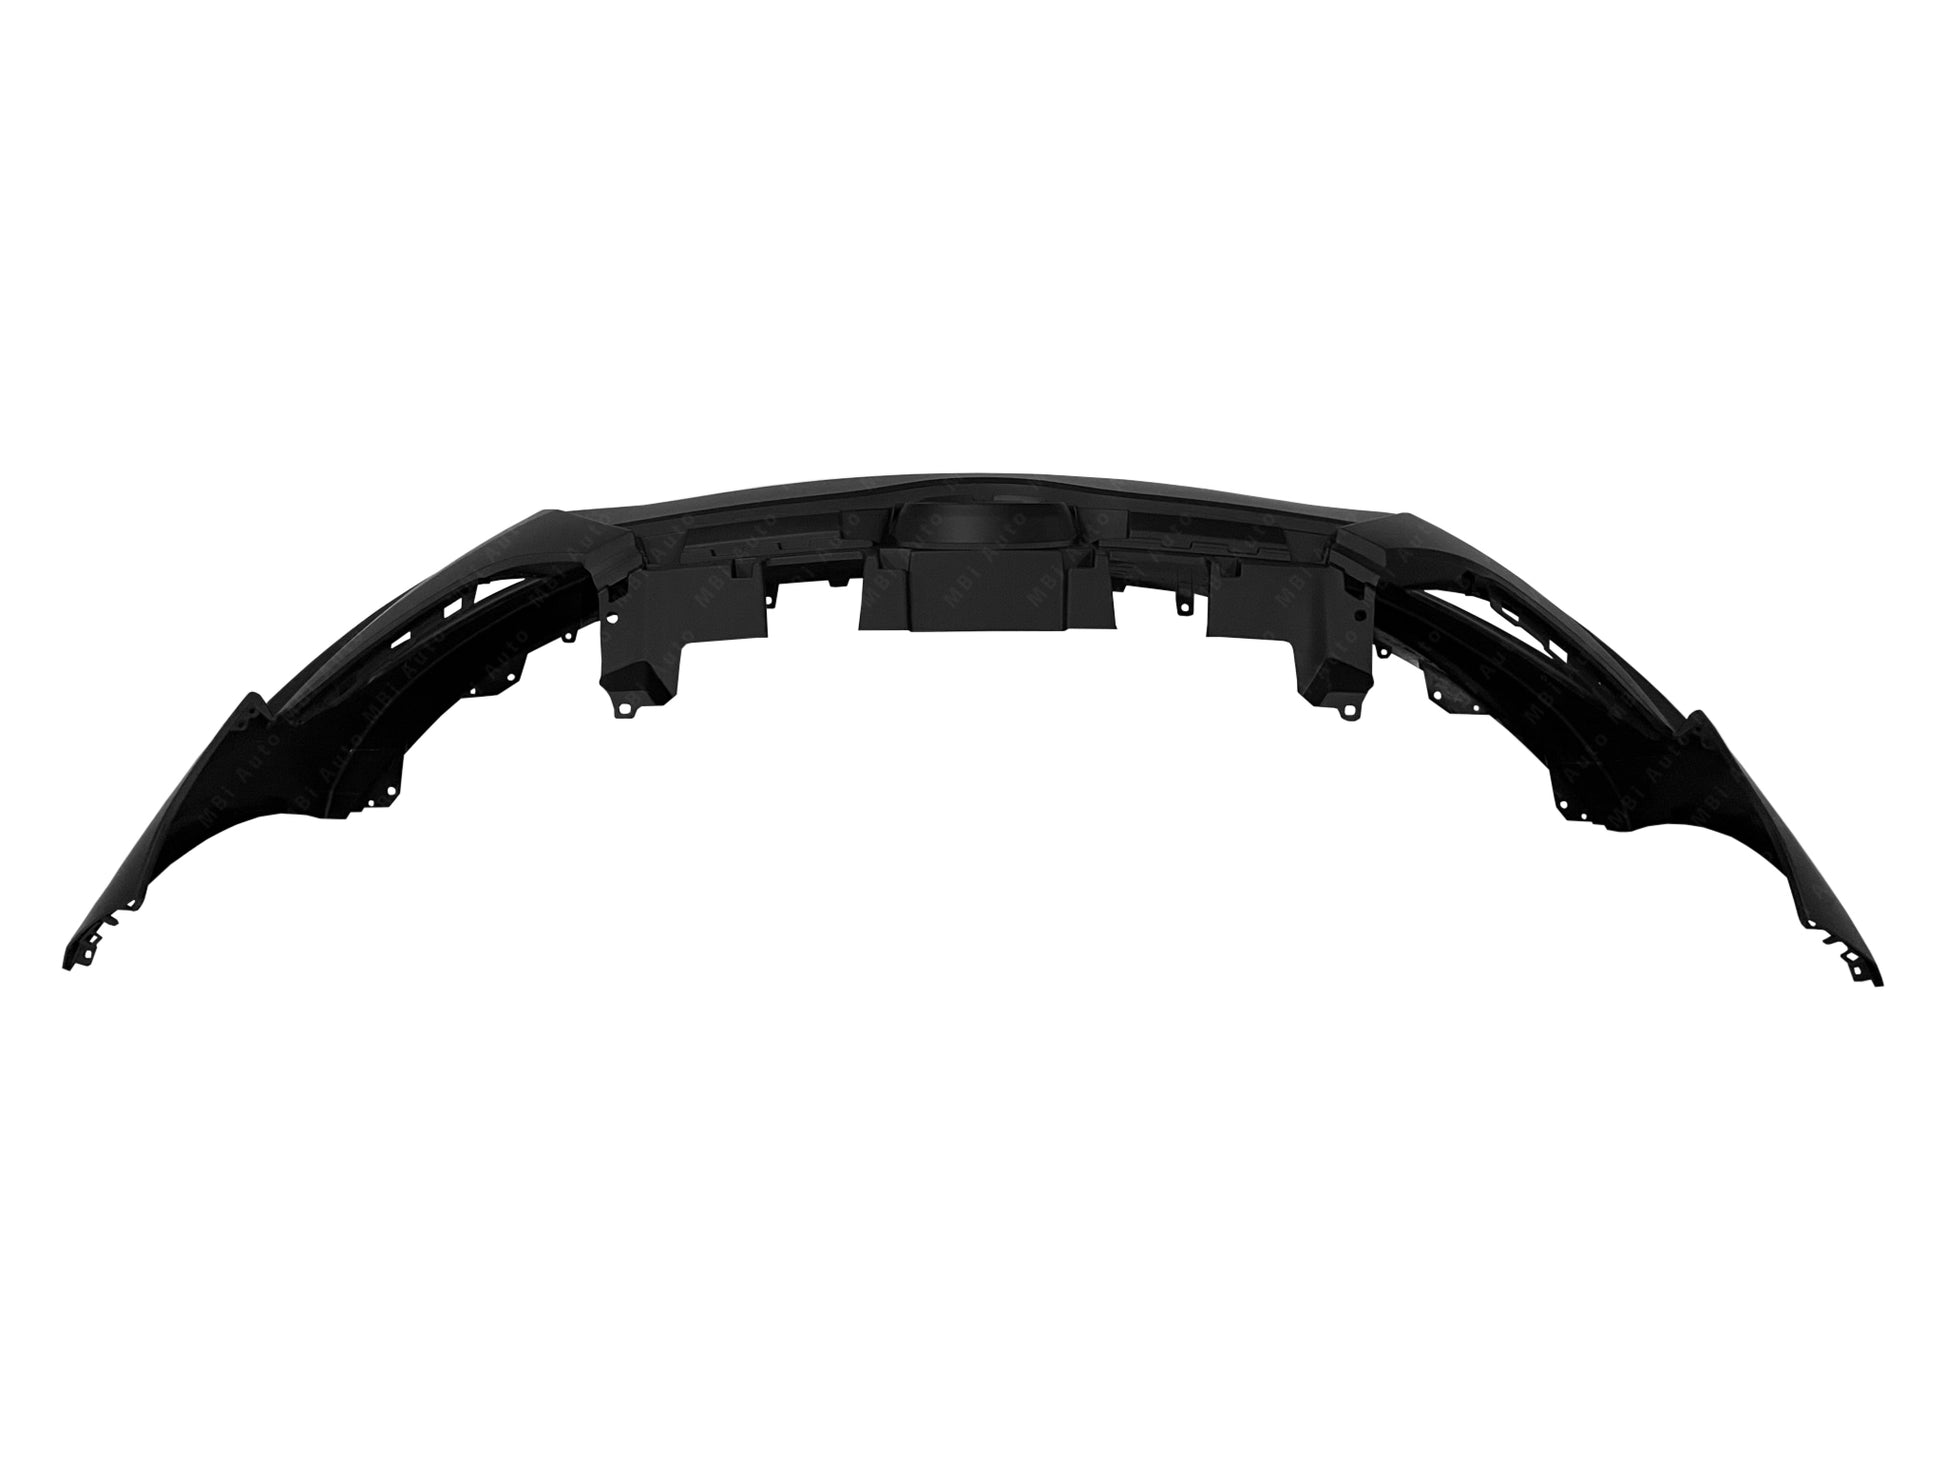 Hyundai Veloster 2012 - 2017 Front Bumper Cover 12 - 17 HY1000189 Bumper King